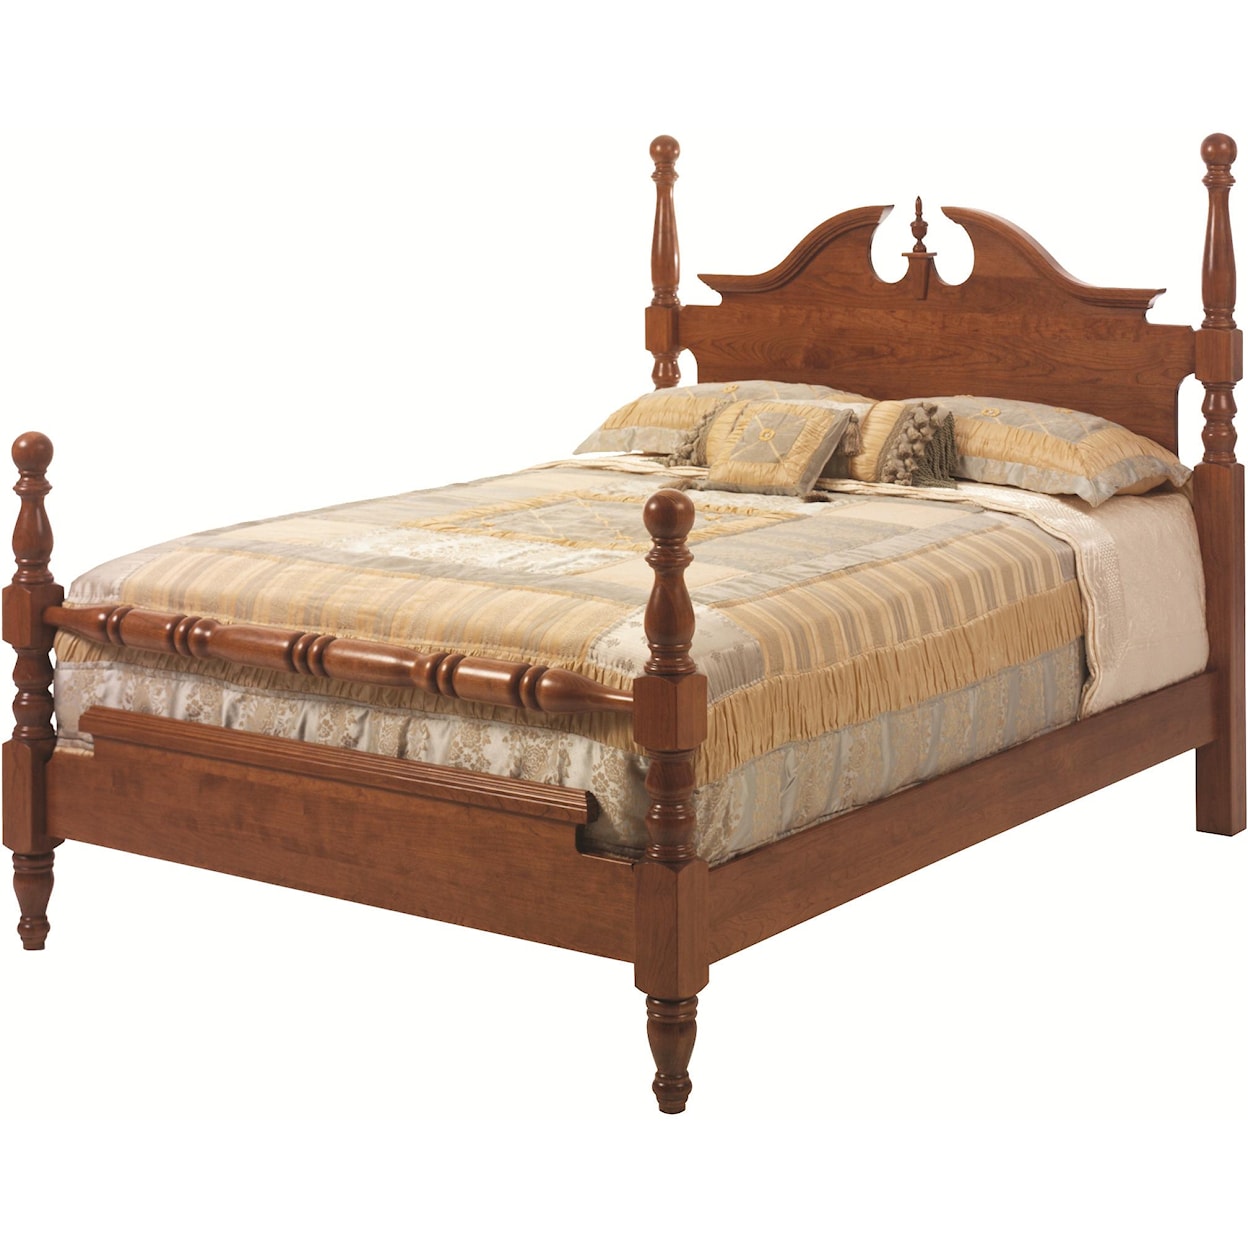 Millcraft Elegant River Bend Full Cannon Ball Bed